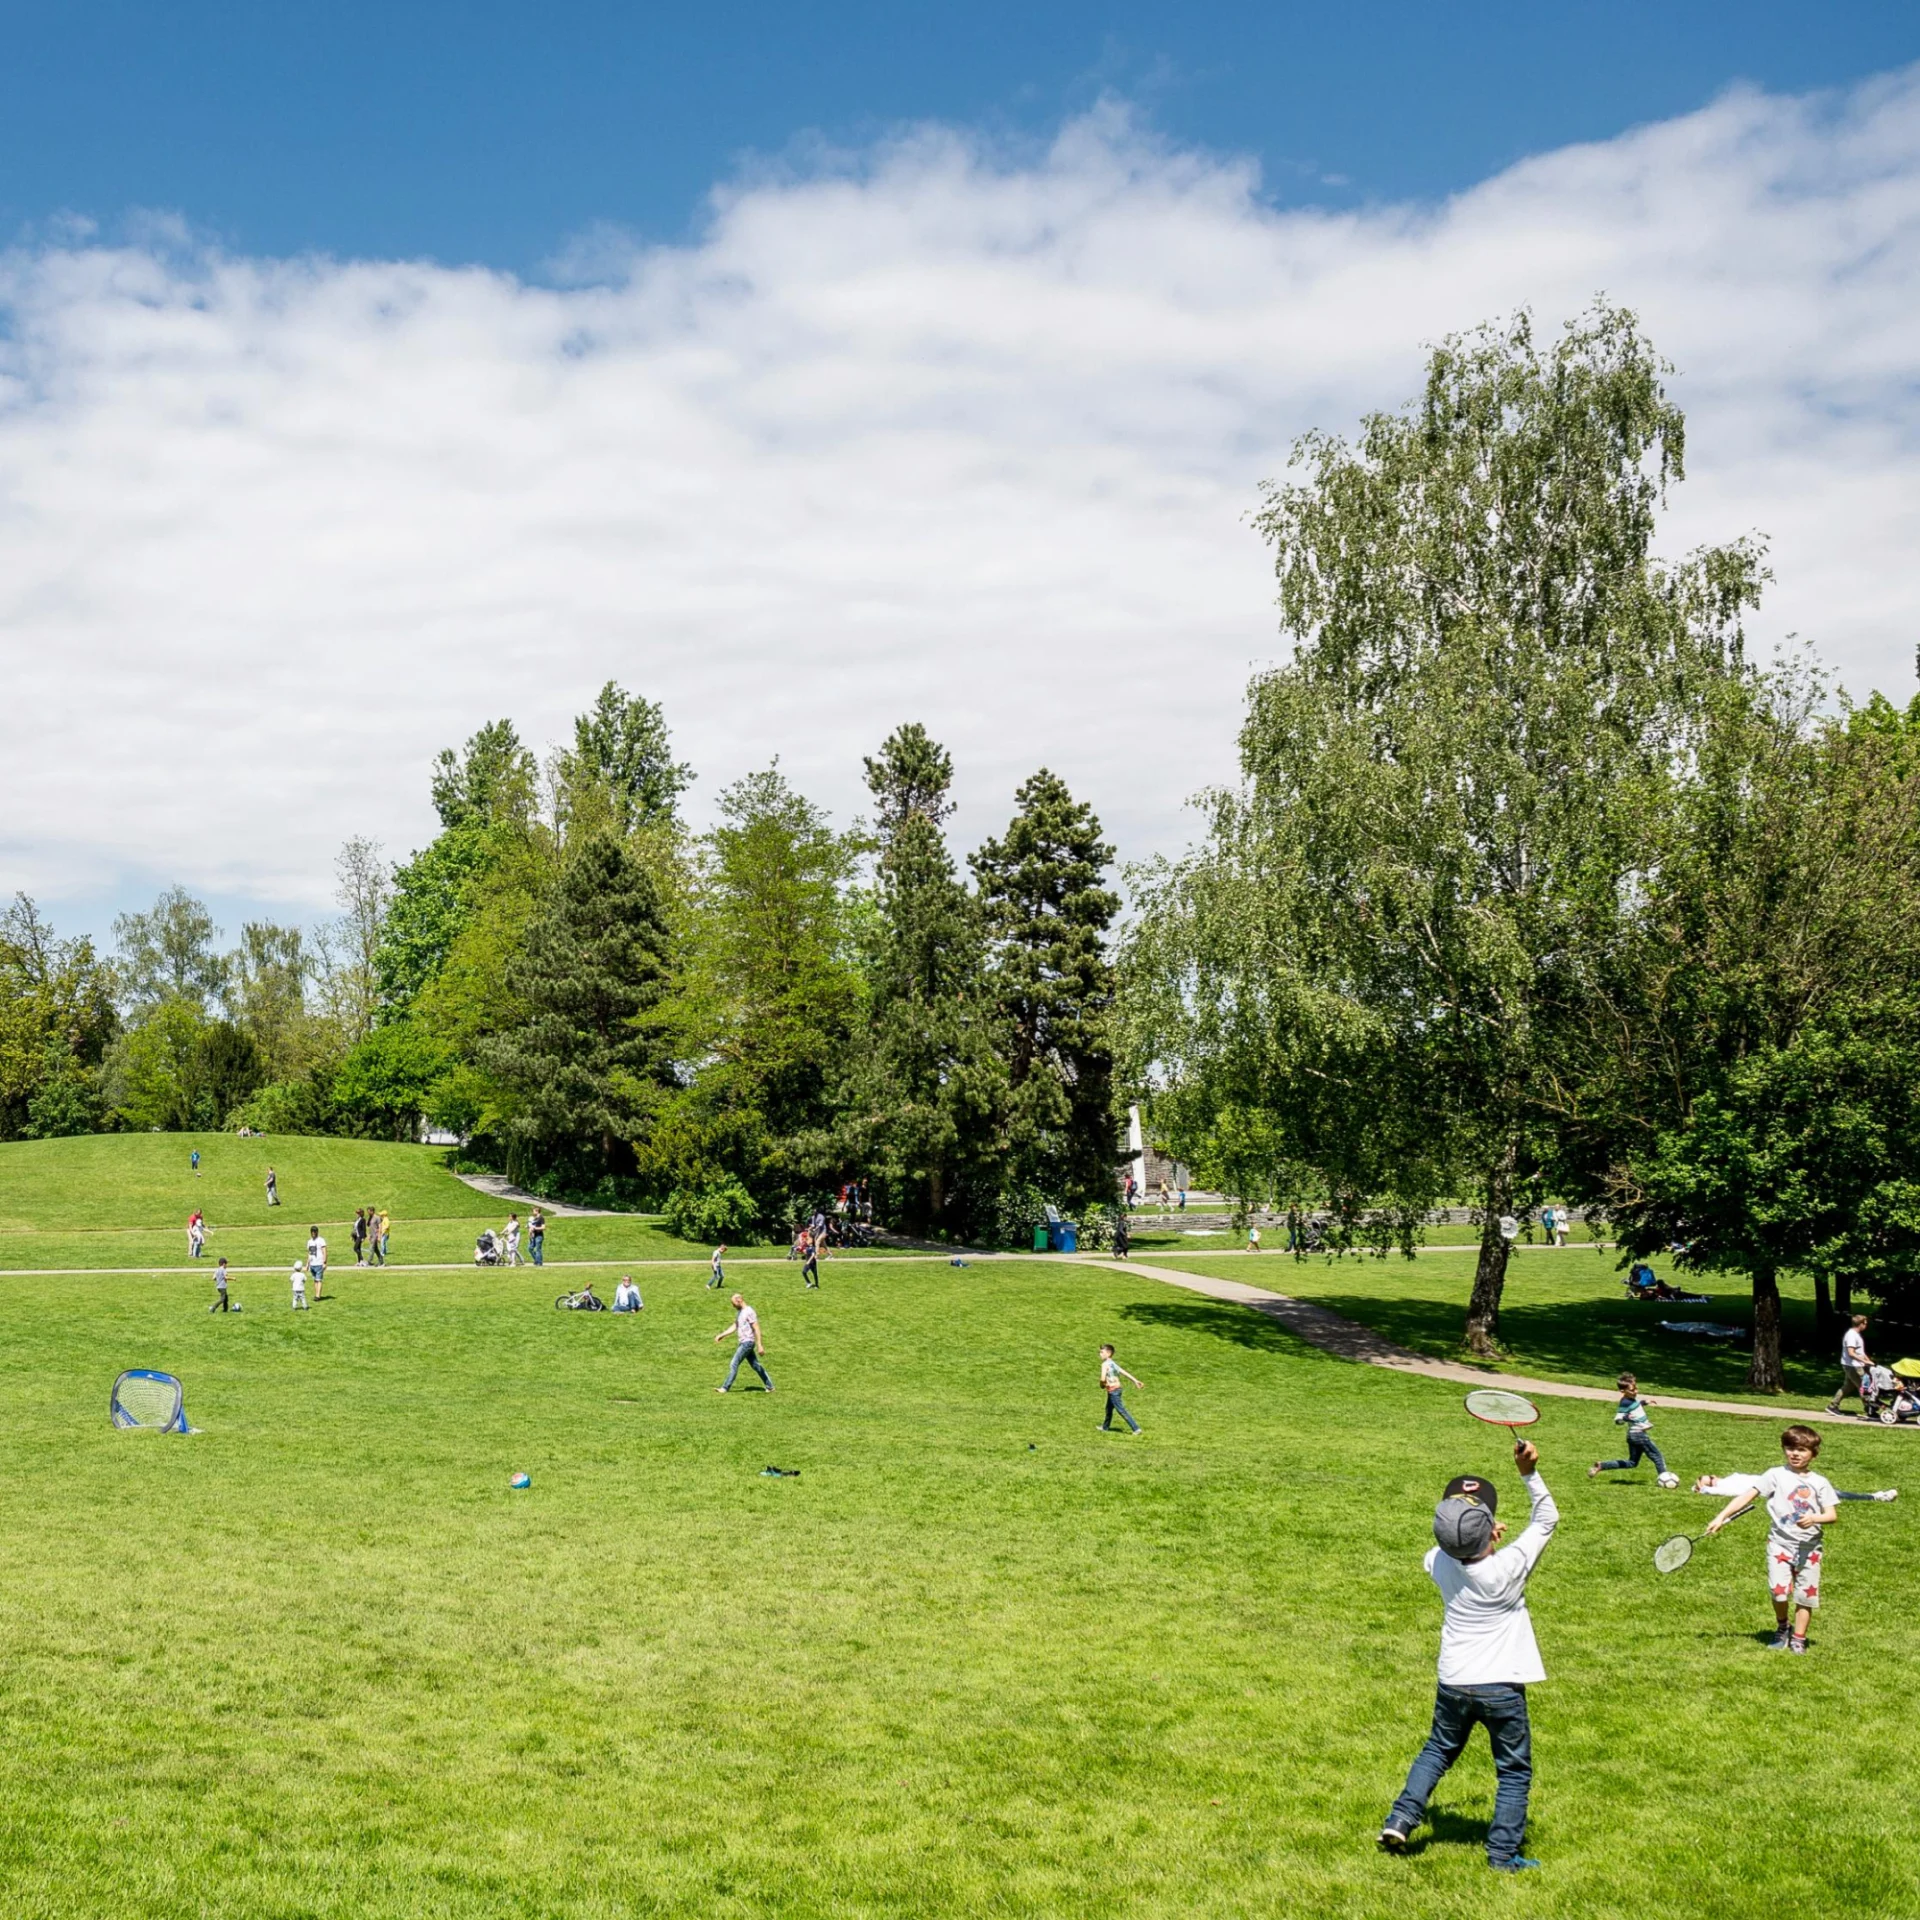 Children playing on a meadow in a park